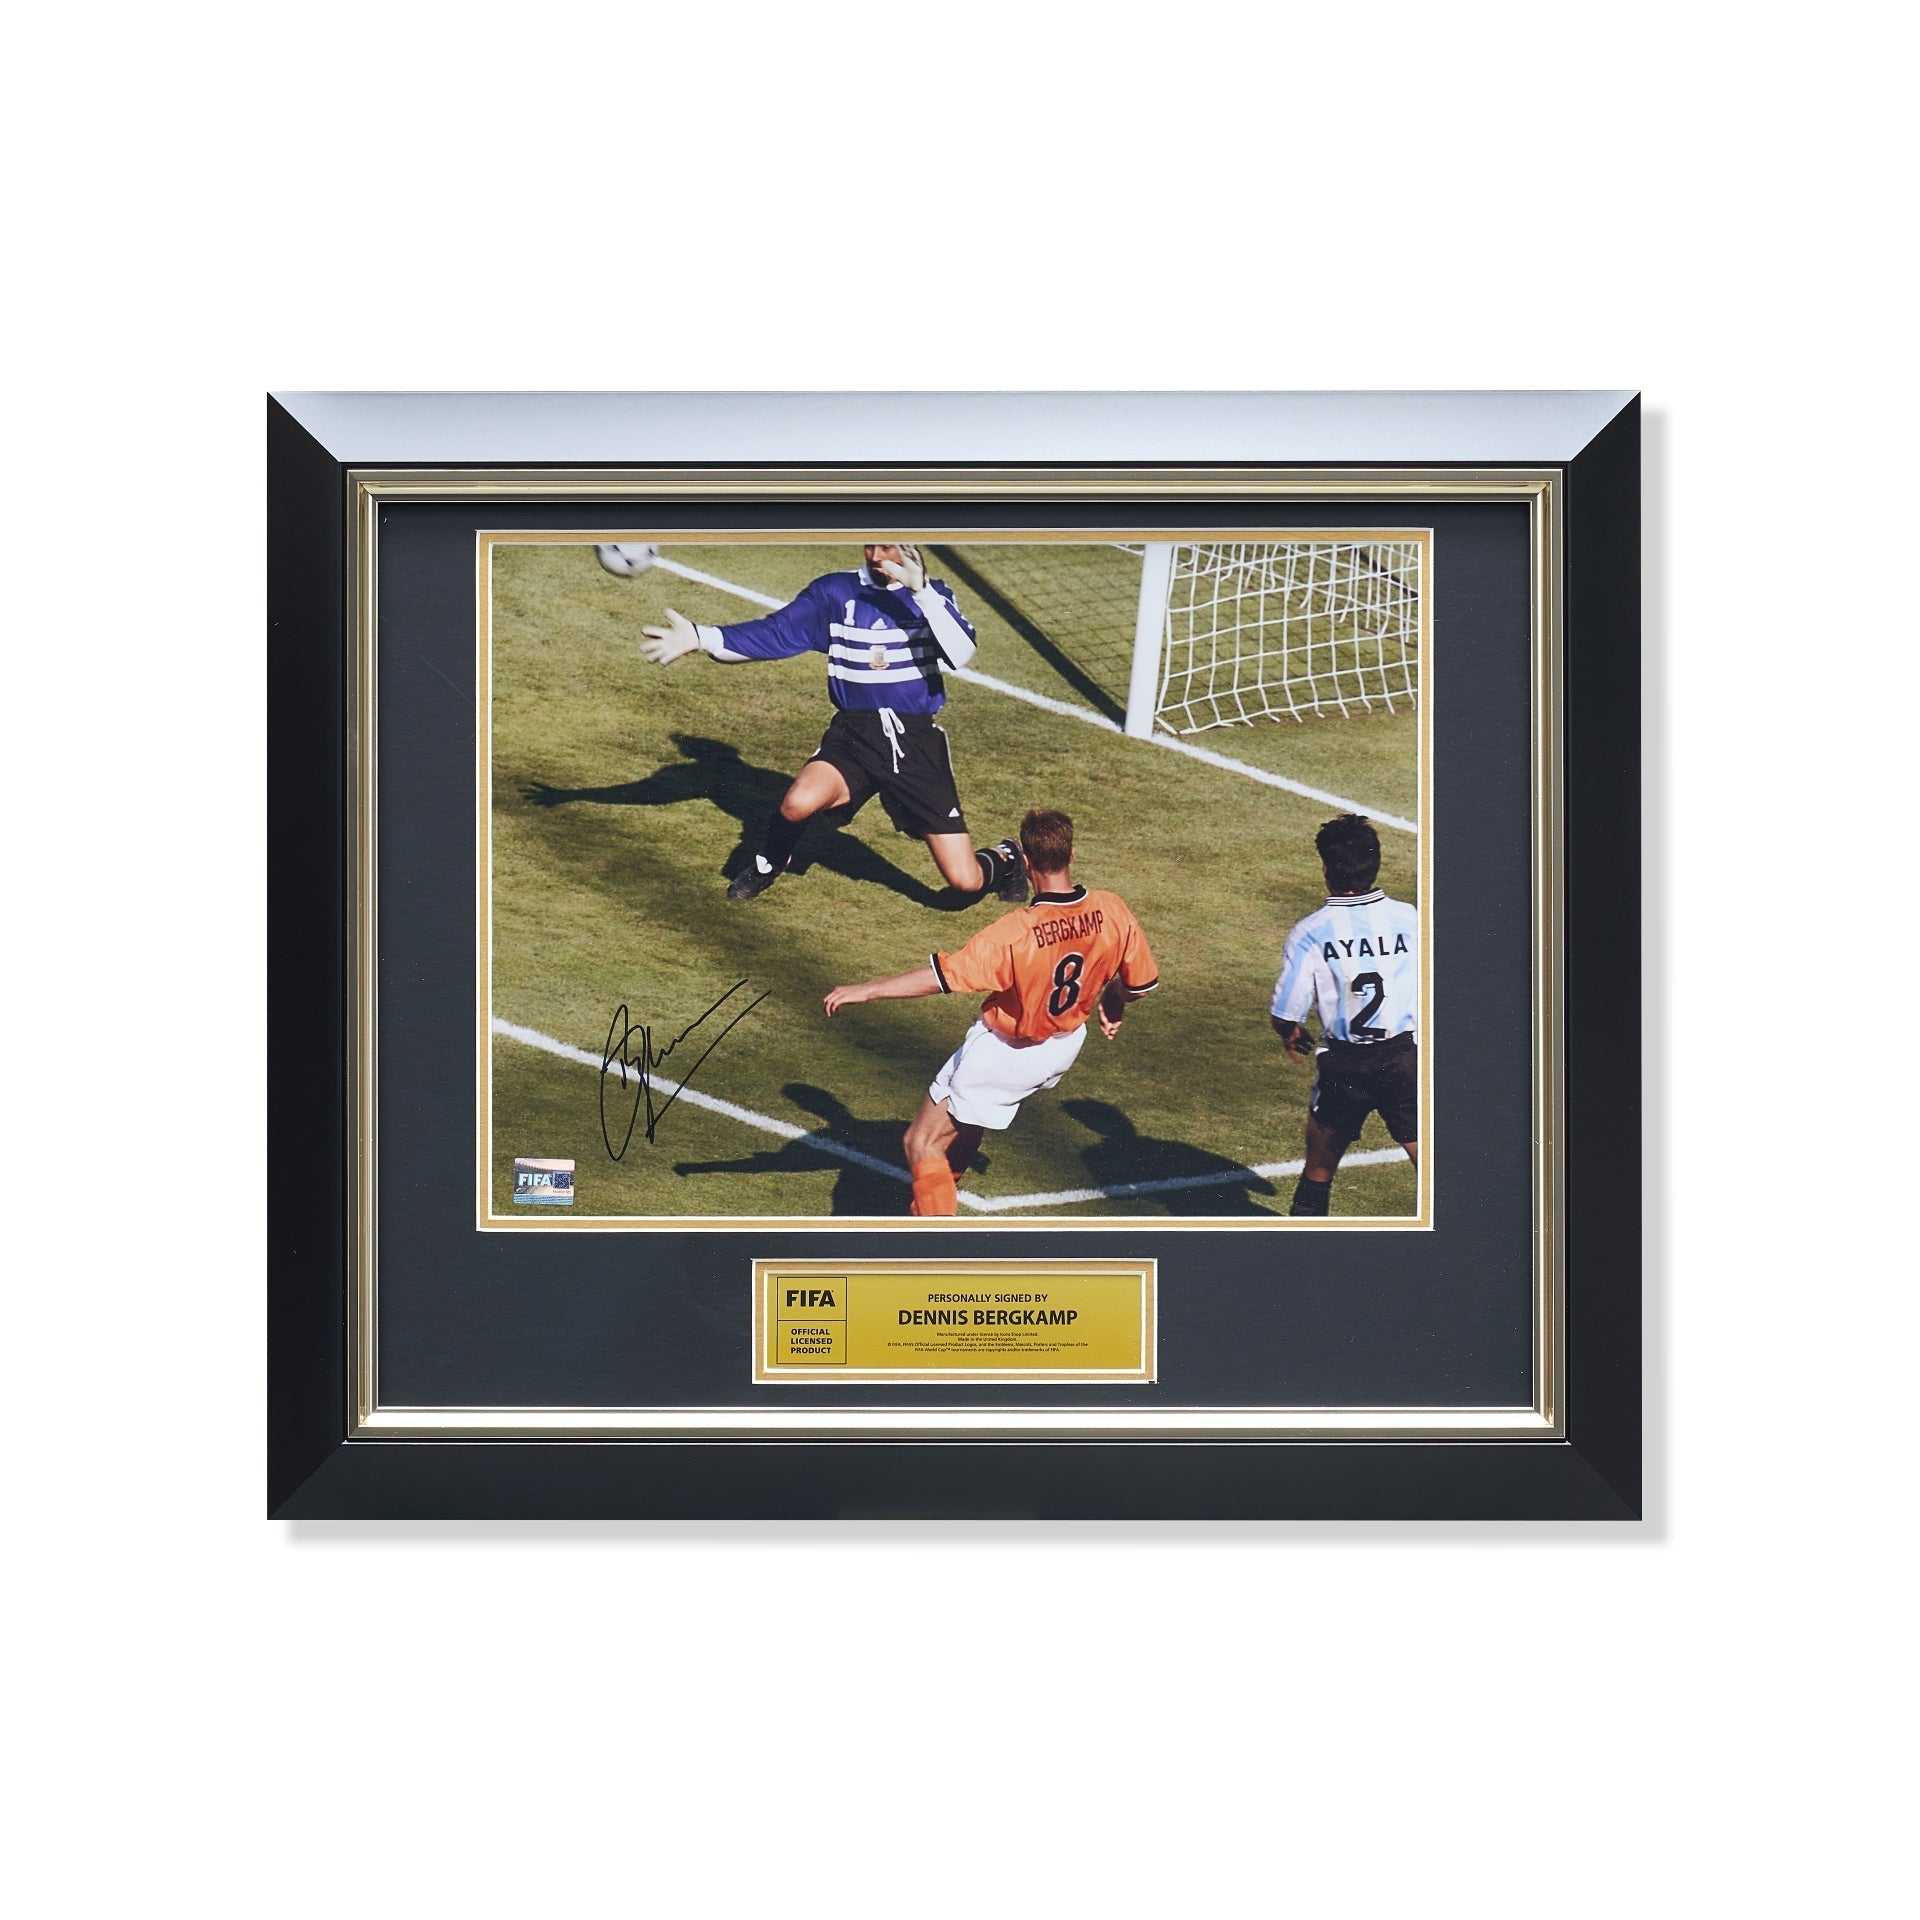 Dennis Bergkamp Signed FIFA World Cup Iconic Goal Photo